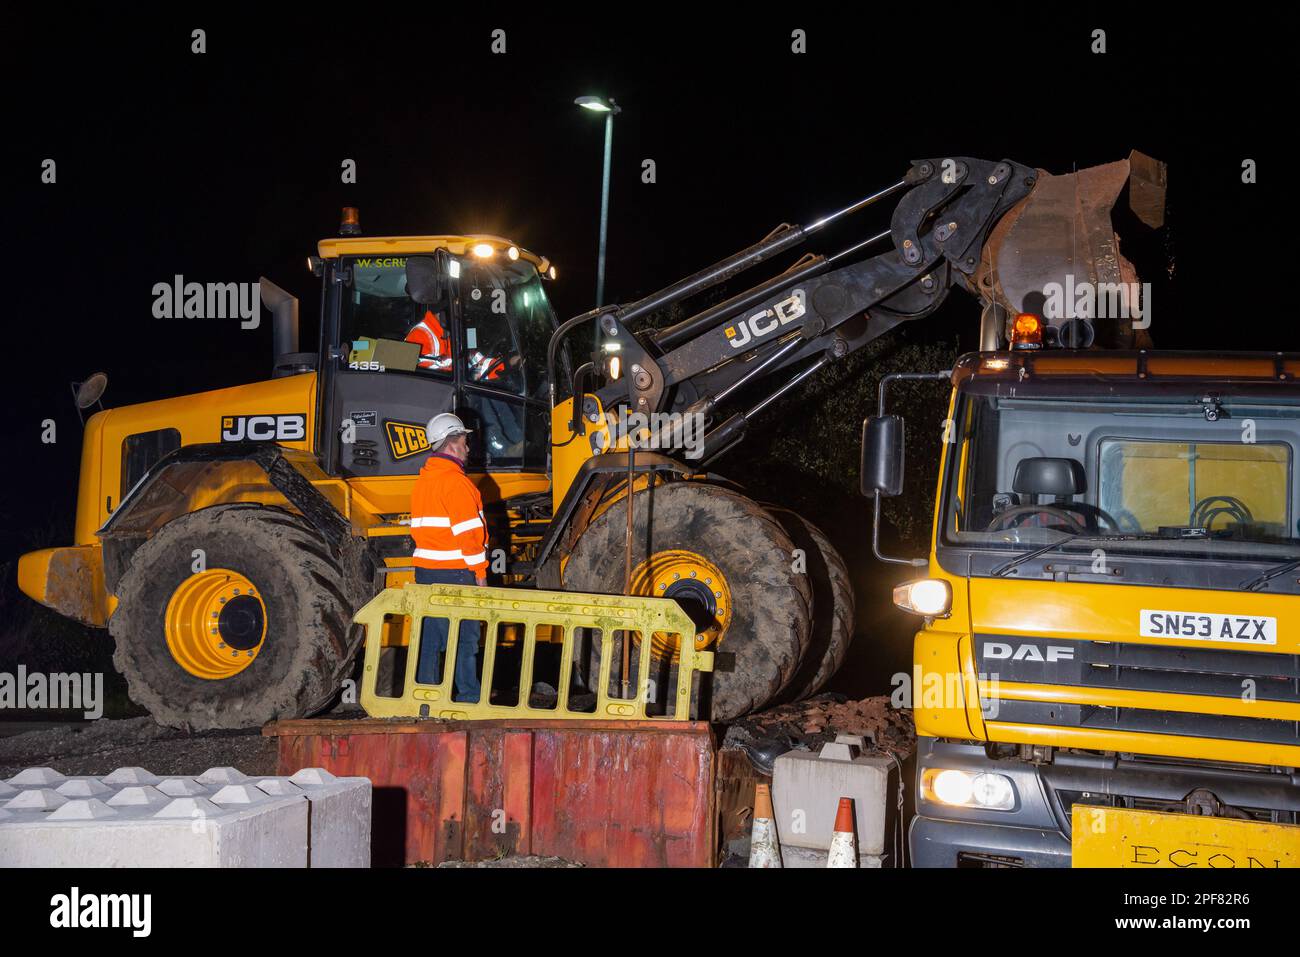 A DAF gritter truck being loaded by a JCB digger at night in Denby Dale, West Yorkshire Stock Photo